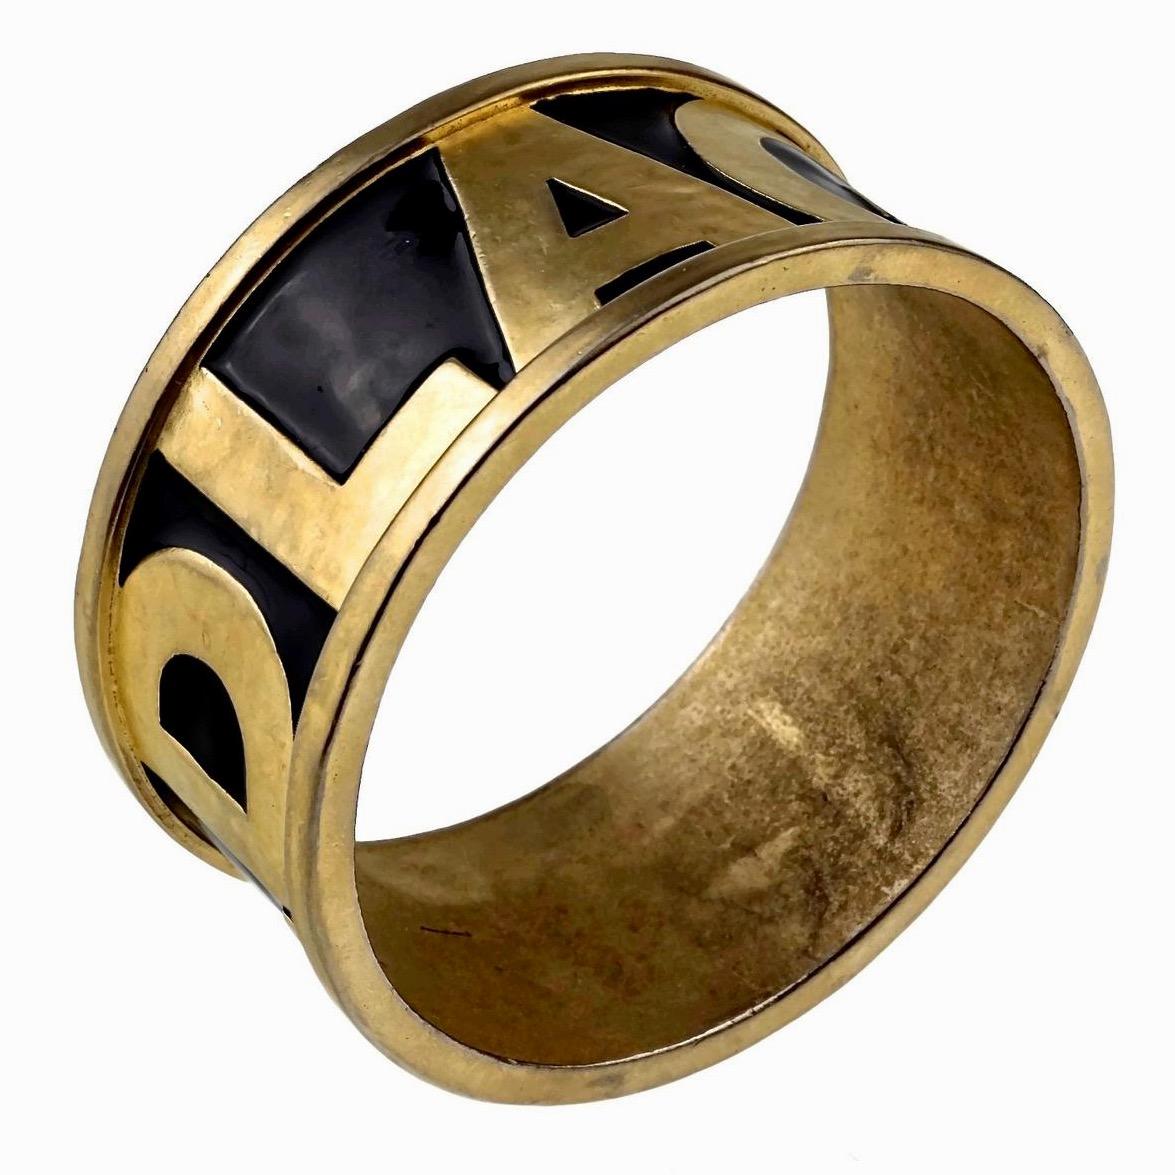 Vintage KARL LAGERFELD Spelled Enamel Cuff Bracelet

Measurements:
Height: 1.3 inches (3.3 cm)
Inner Circumference: 7.87 inches(20 cm)

Features:
- 100% Authentic KARL LAGERFELD.
- Chunky bracelet cuff in matte gold tone and black enamel .
- Raised